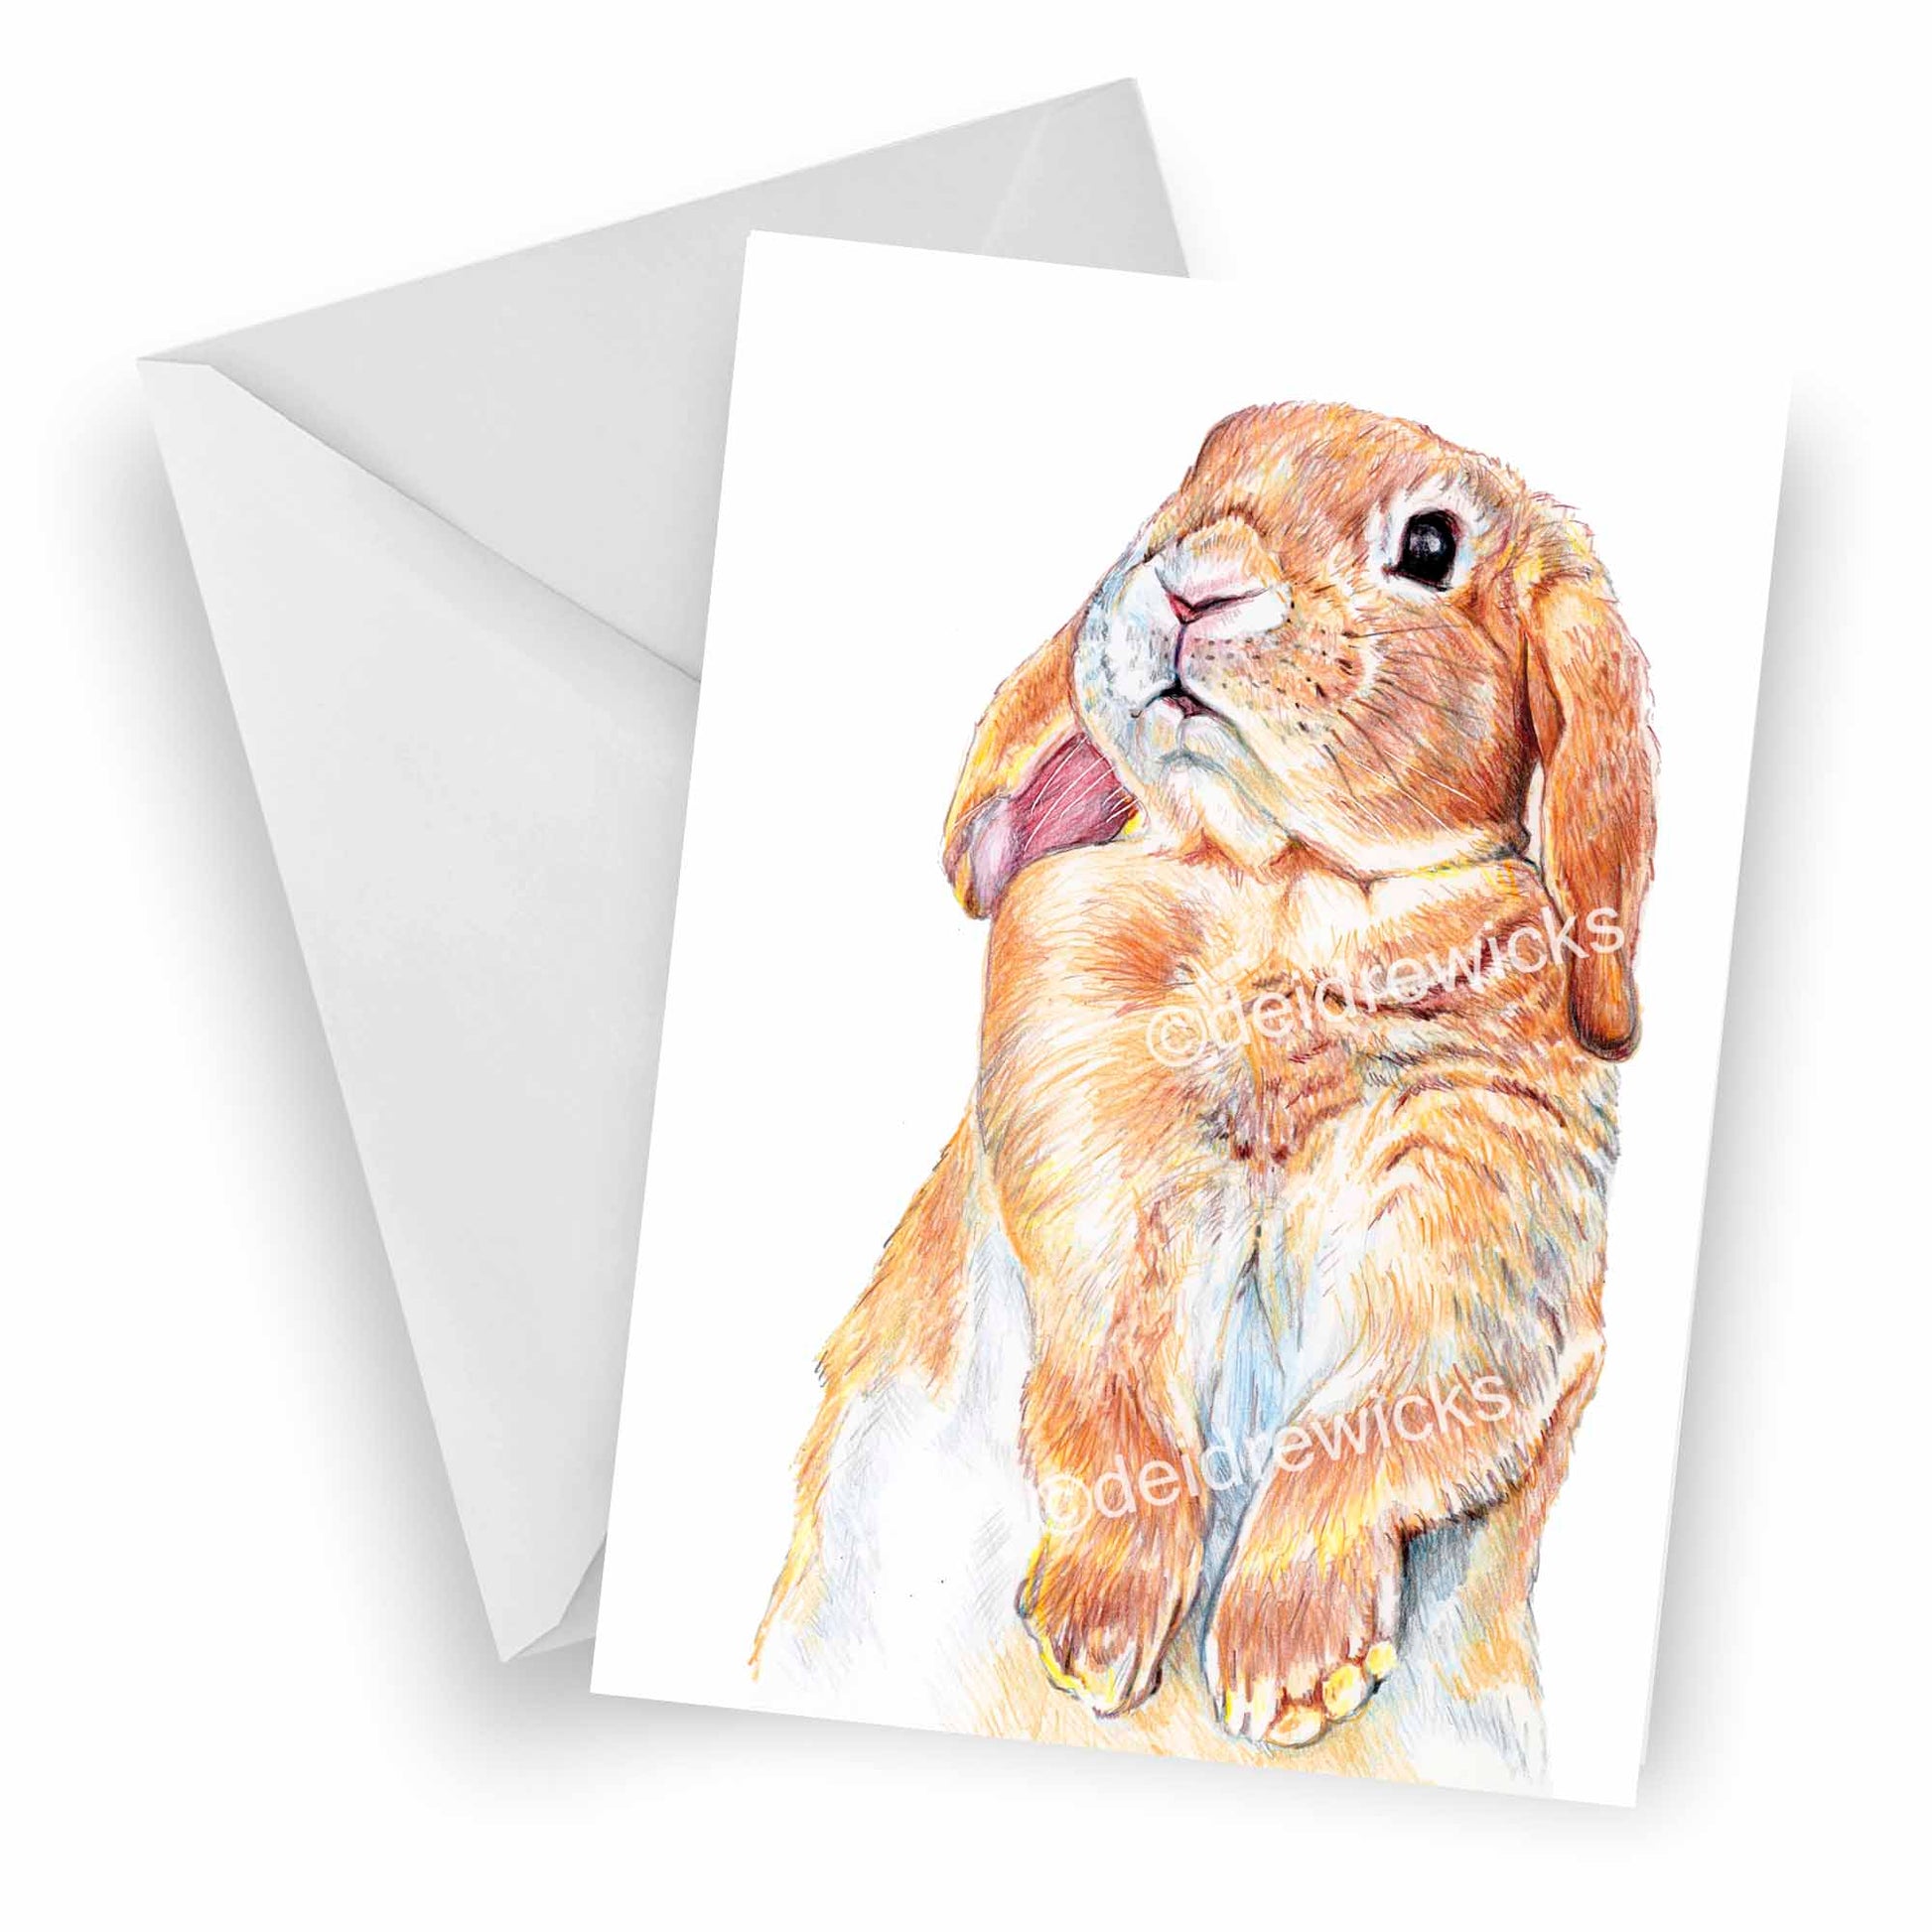 Blank Greeting card featuring a lop eared bunny rabbit sniffing the air. Coloured pencil art by Deidre Wicks